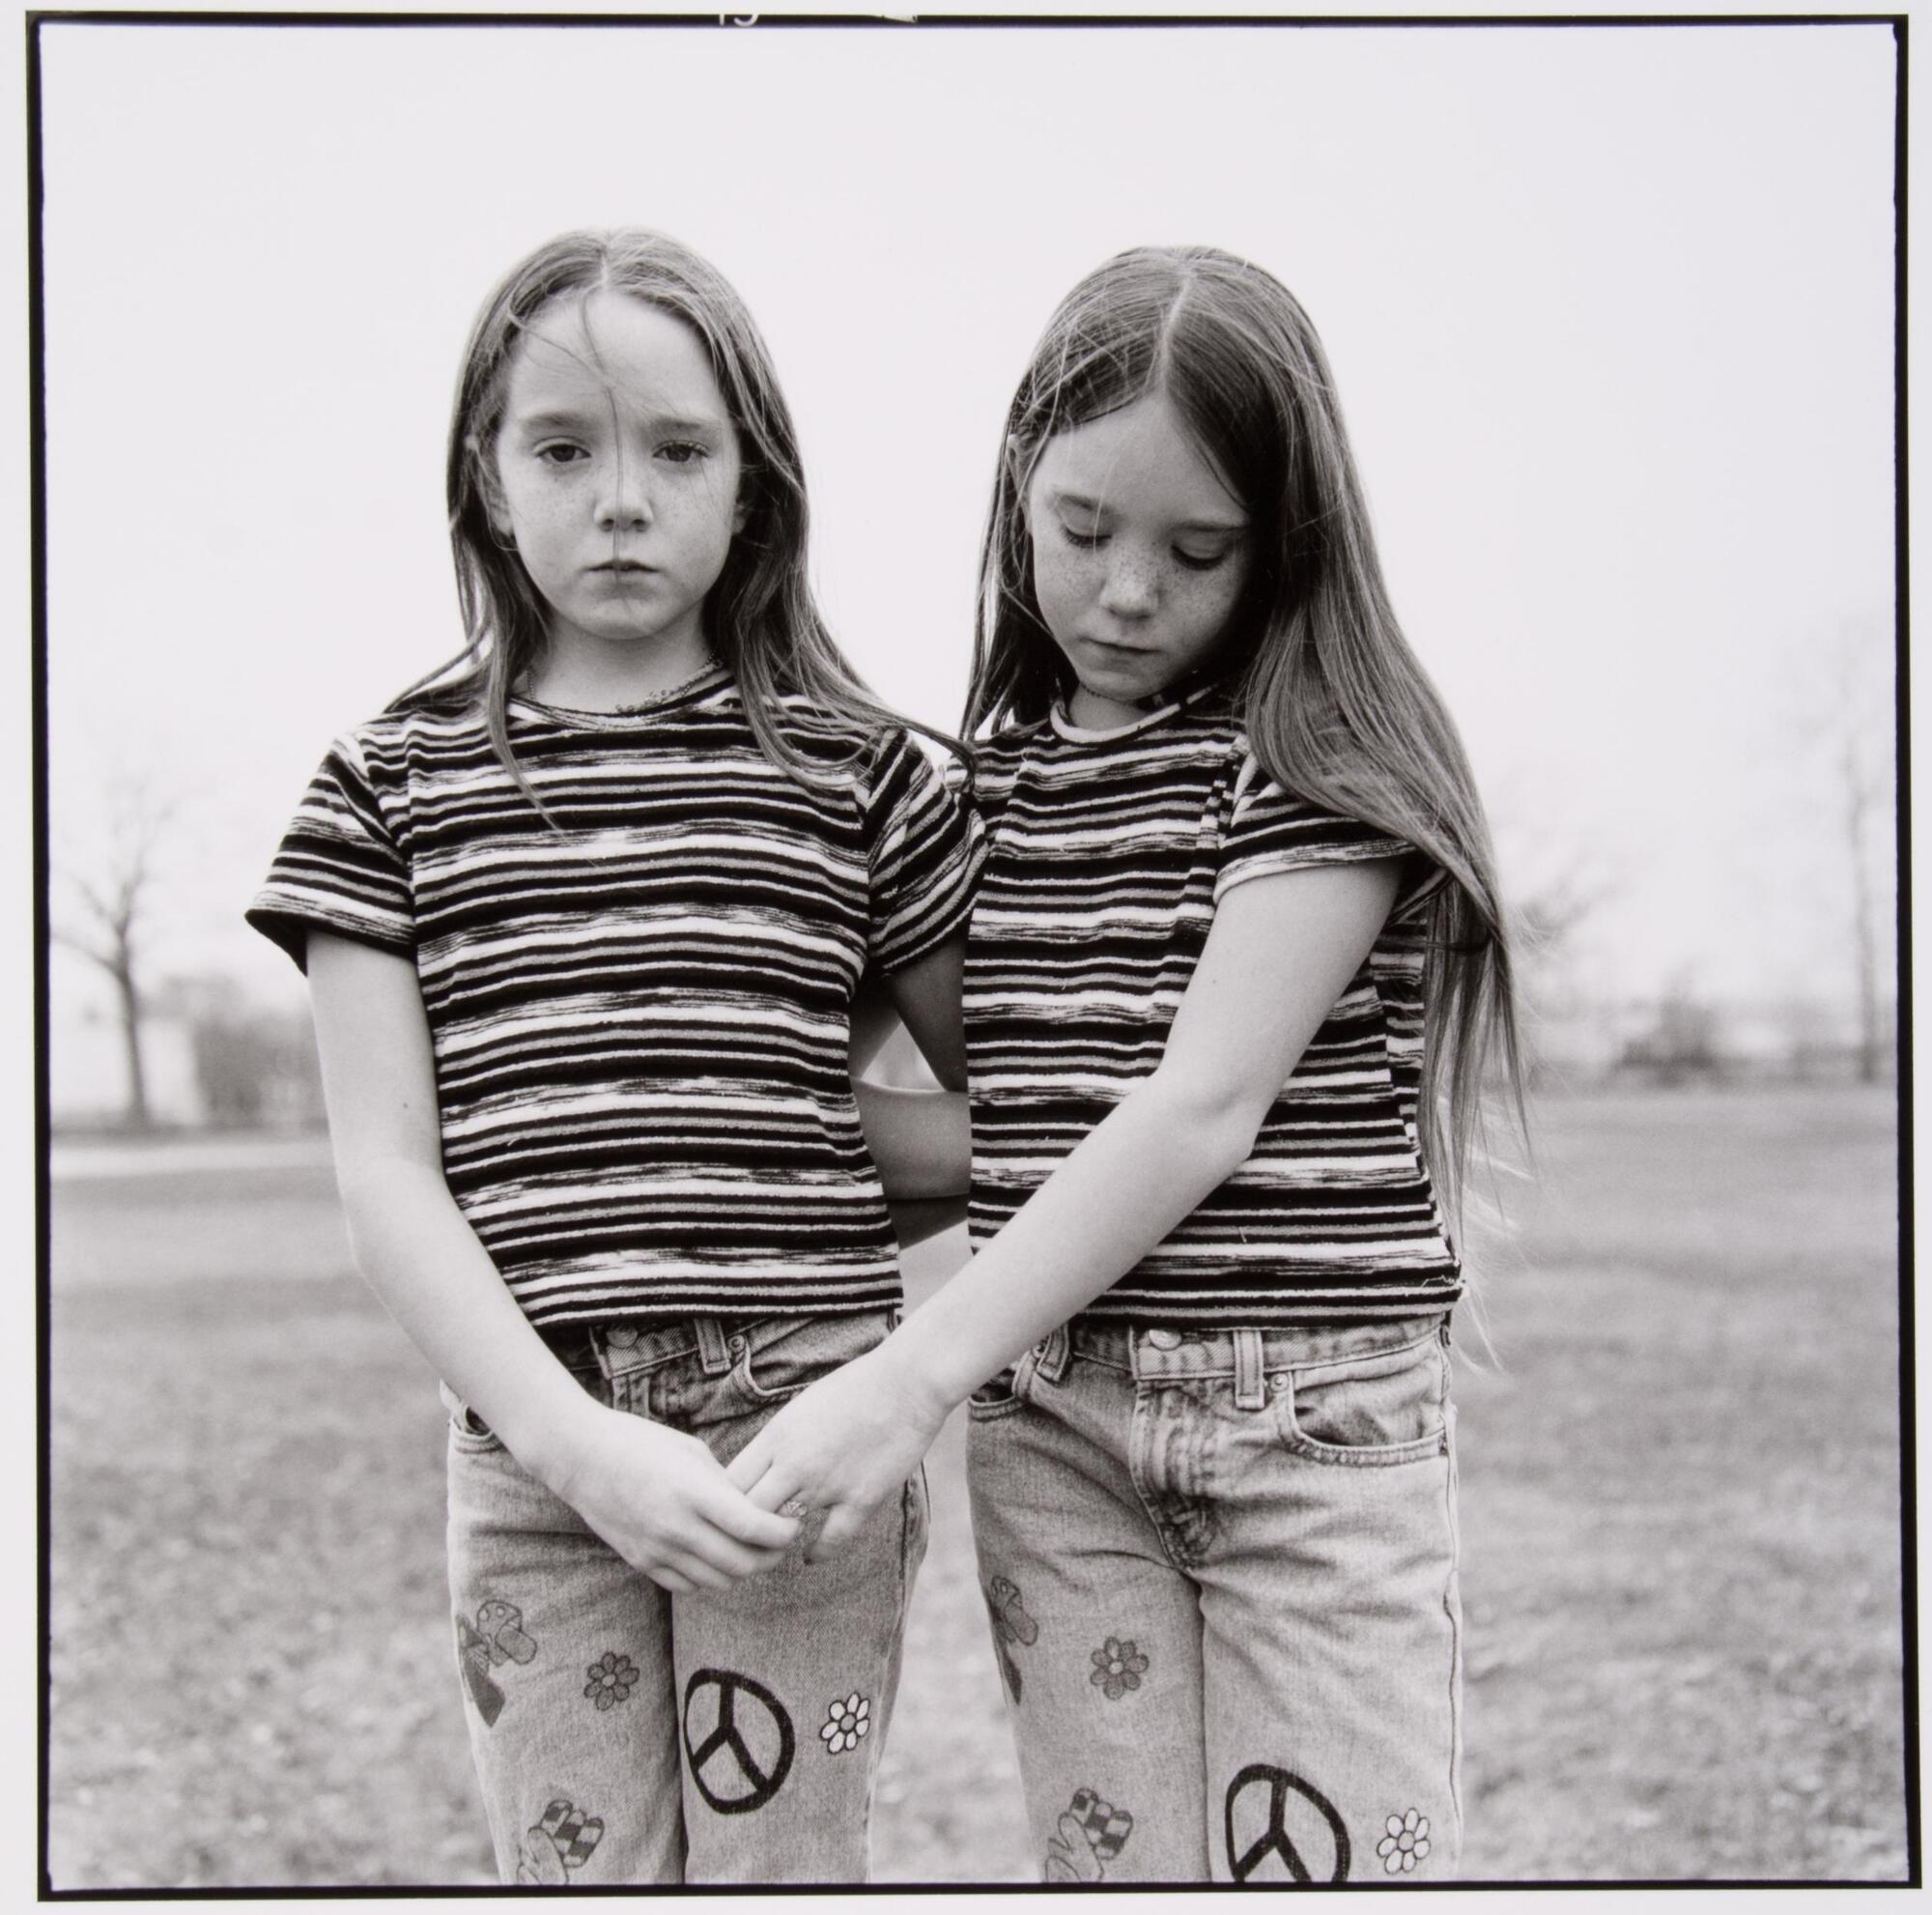 Twin girls wearing matching outfits and standing in a field. They are holding hands and one is looking at the camera, the other is looking down.